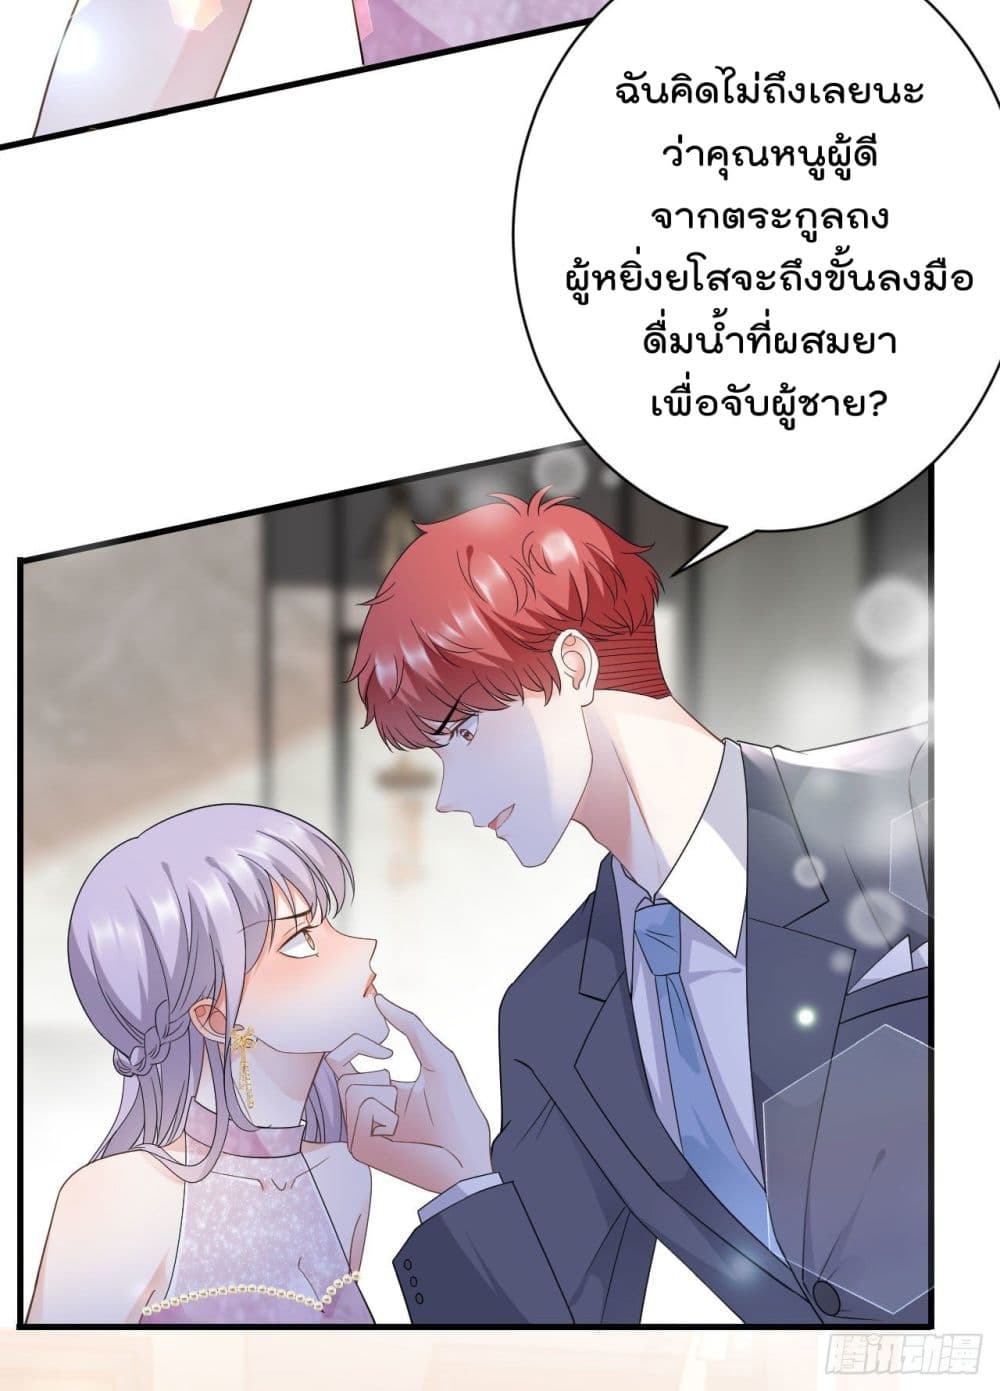 What Can the Eldest Lady Have คุณหนูใหญ่ ทำไมคุณร้ายอย่างนี้ 24-24